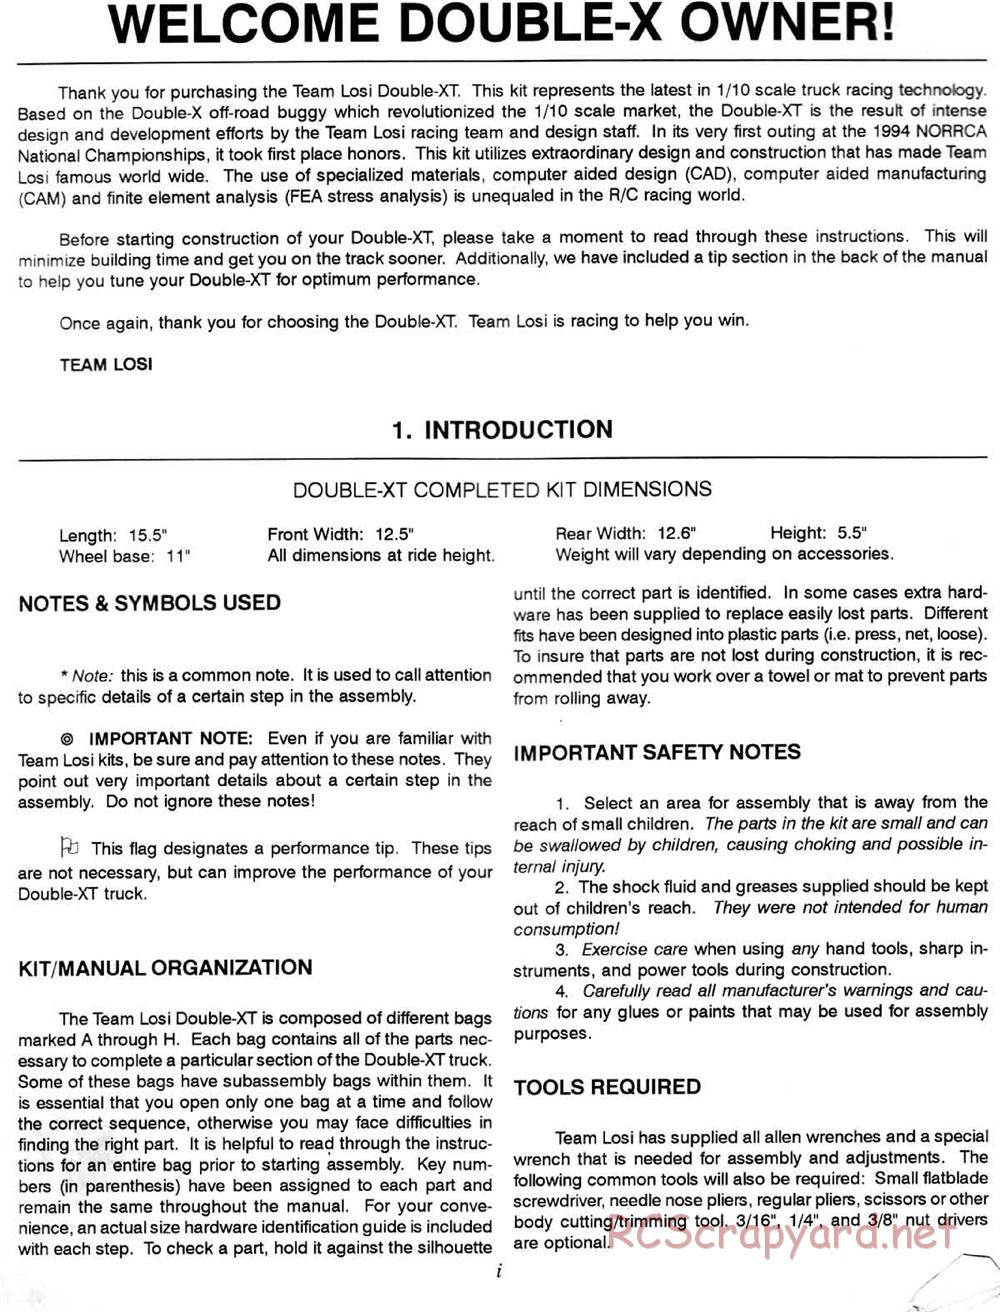 Team Losi - XXT - Manual - Page 2